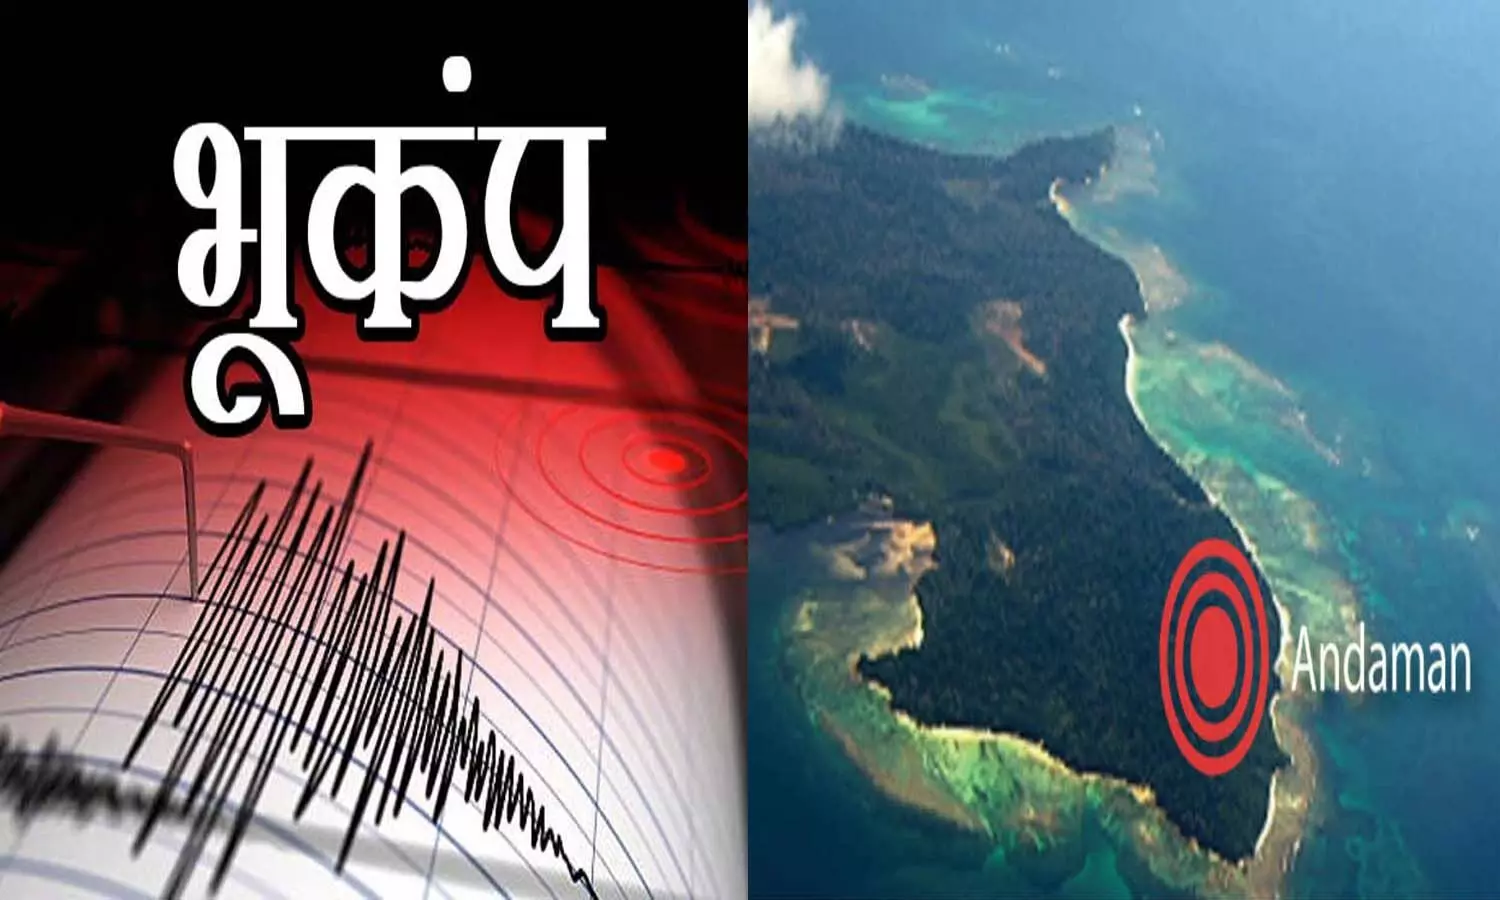 Strong tremors of earthquake felt in Andaman, 4.6 recorded on Richter scale